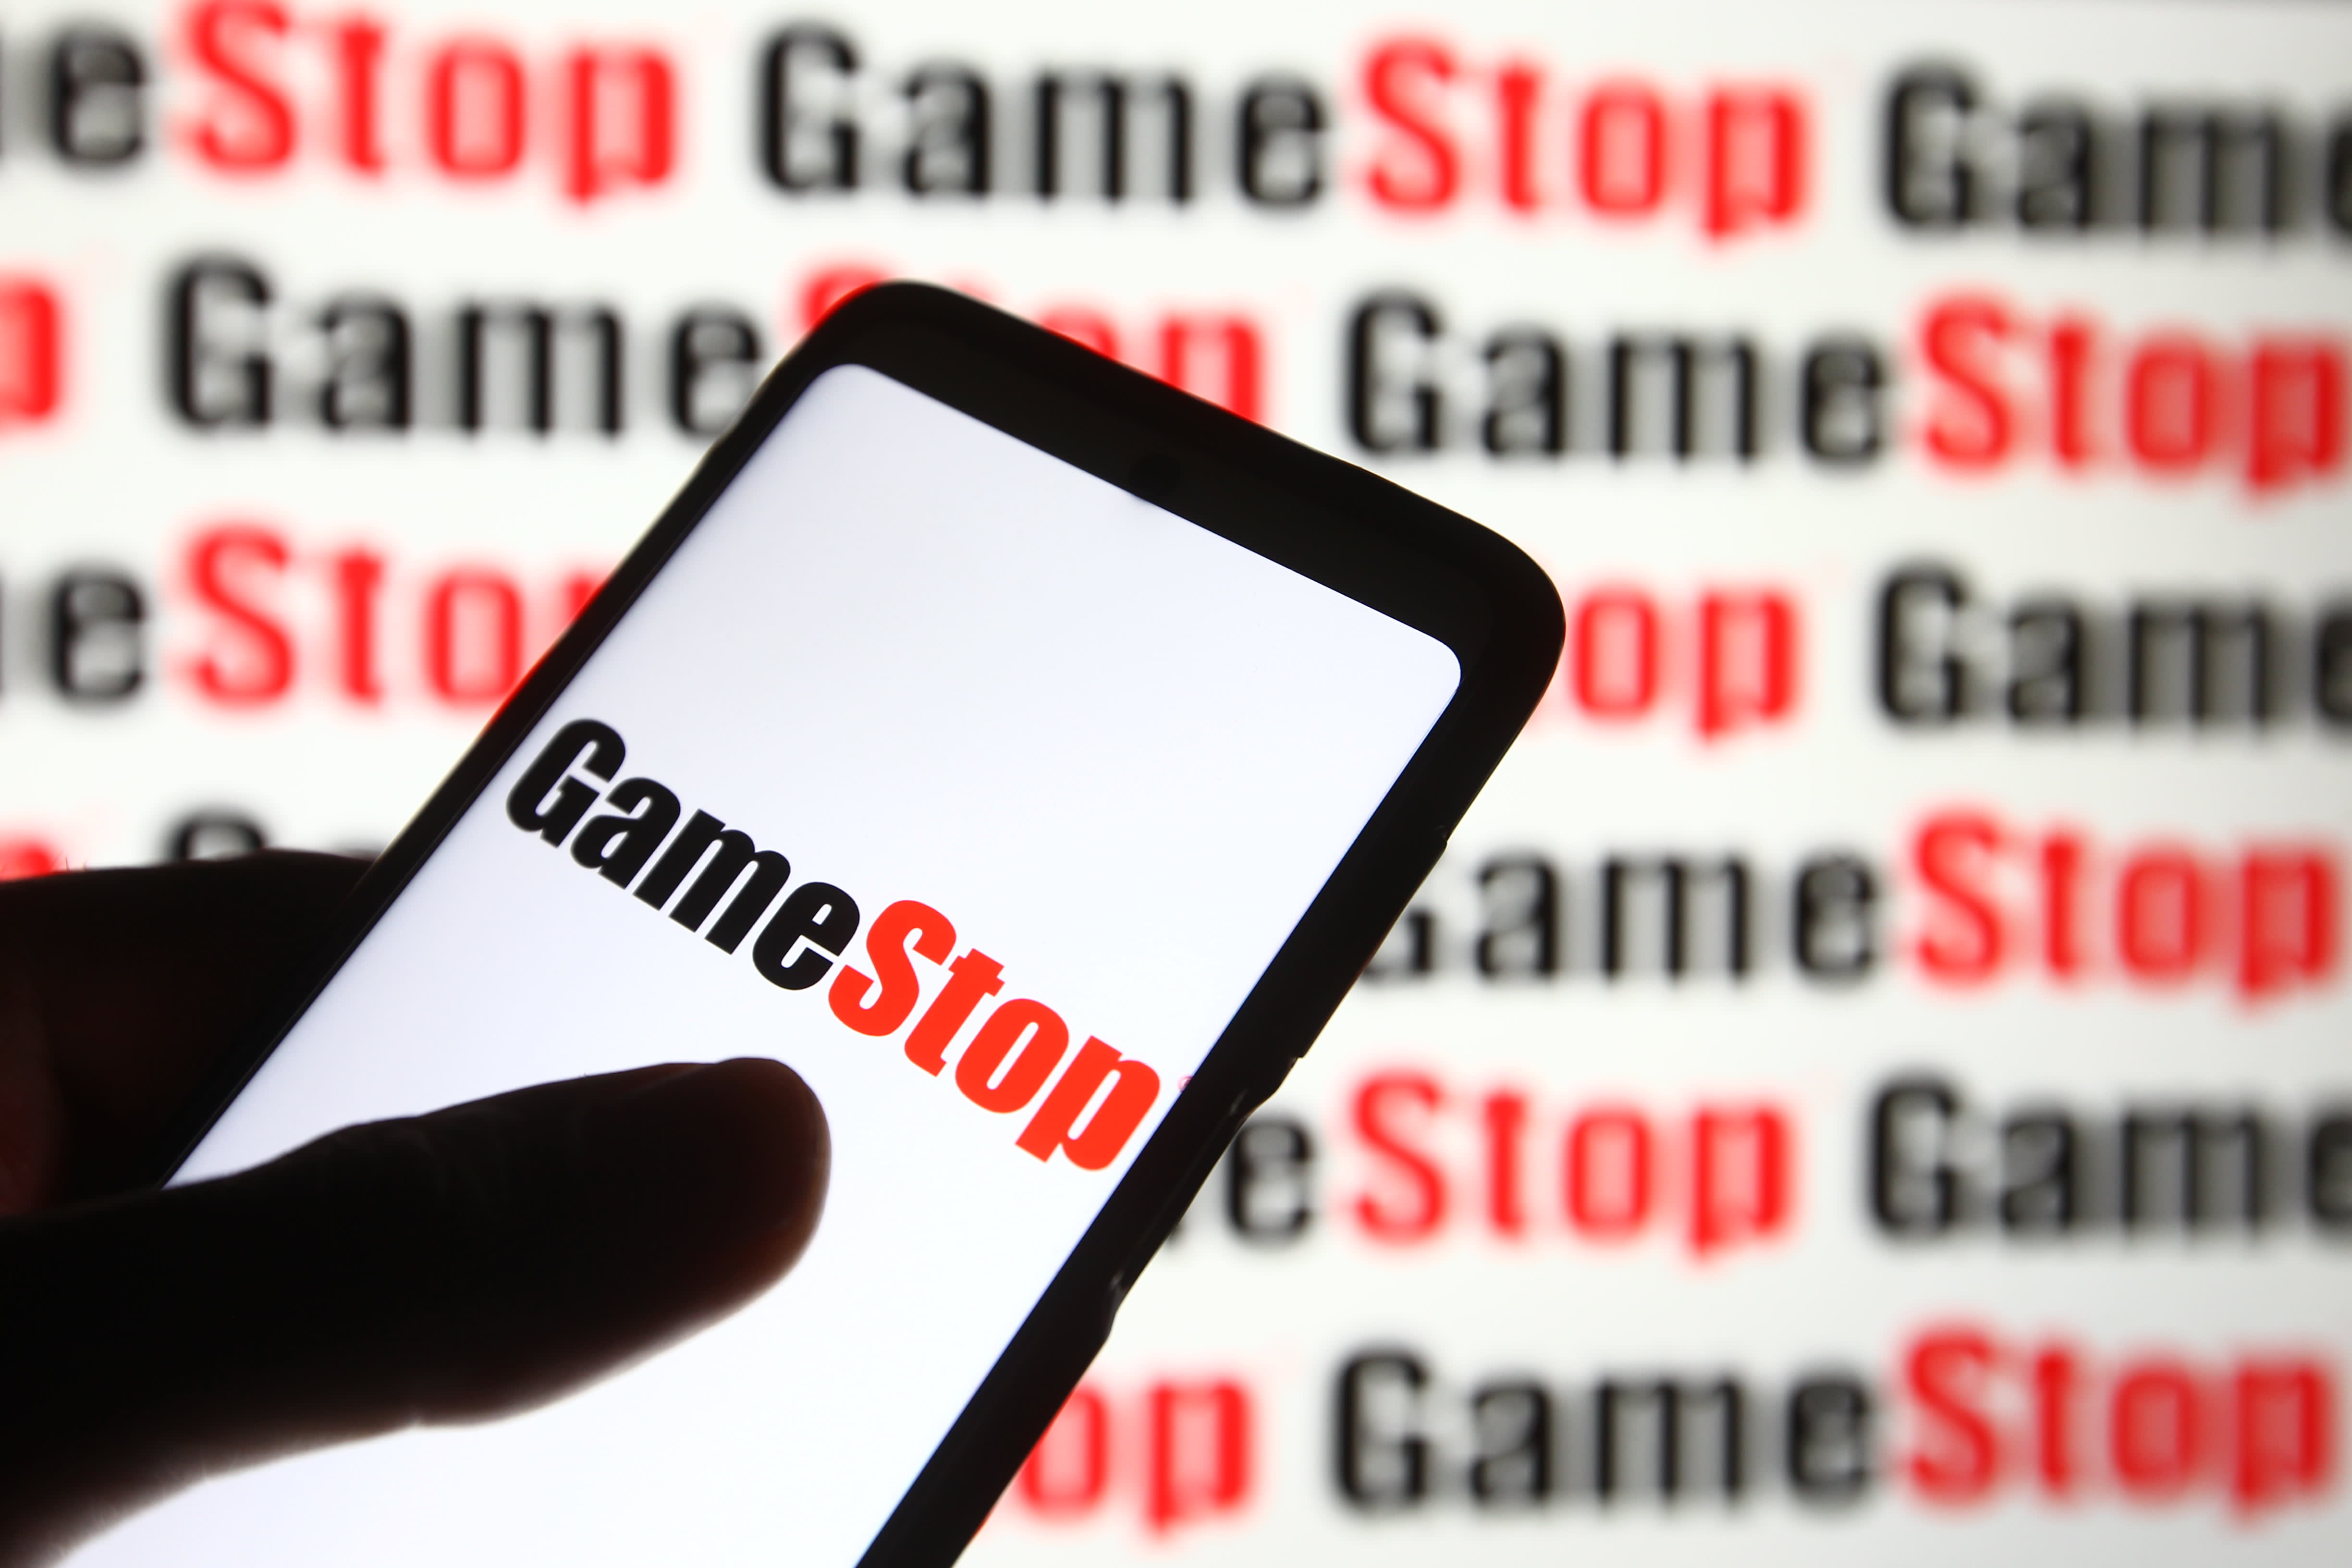 Don't chase meme stock GameStop here, says Jefferies